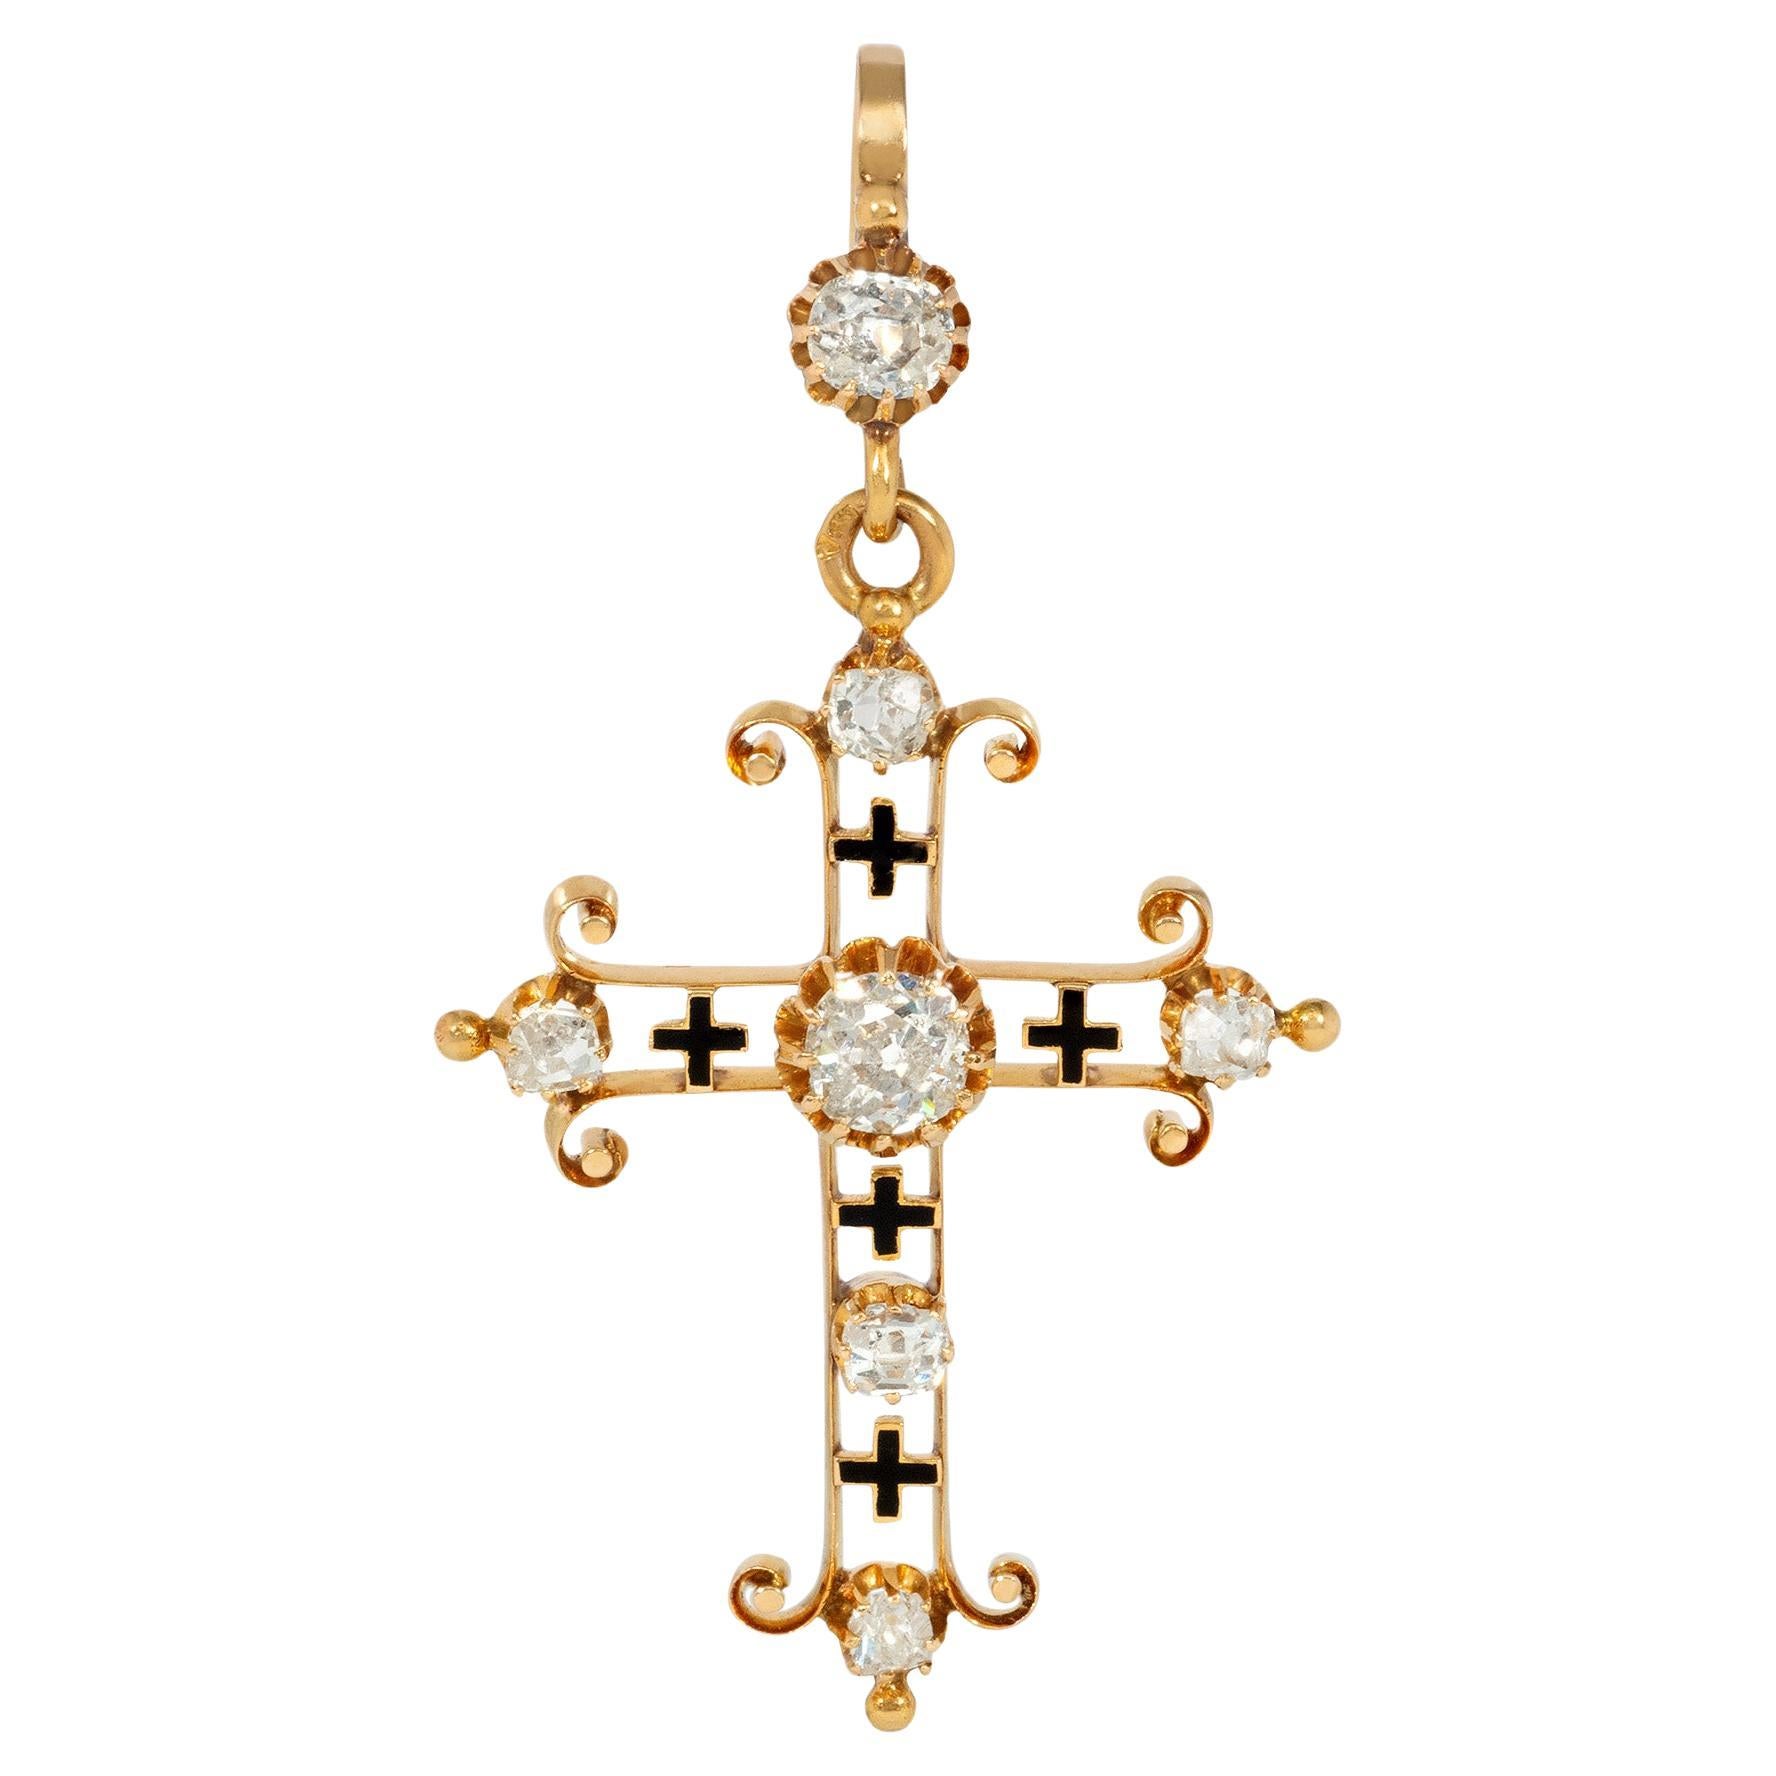 French Antique Gold and Old Mine Diamond Cross Pendant with Enamel Accents